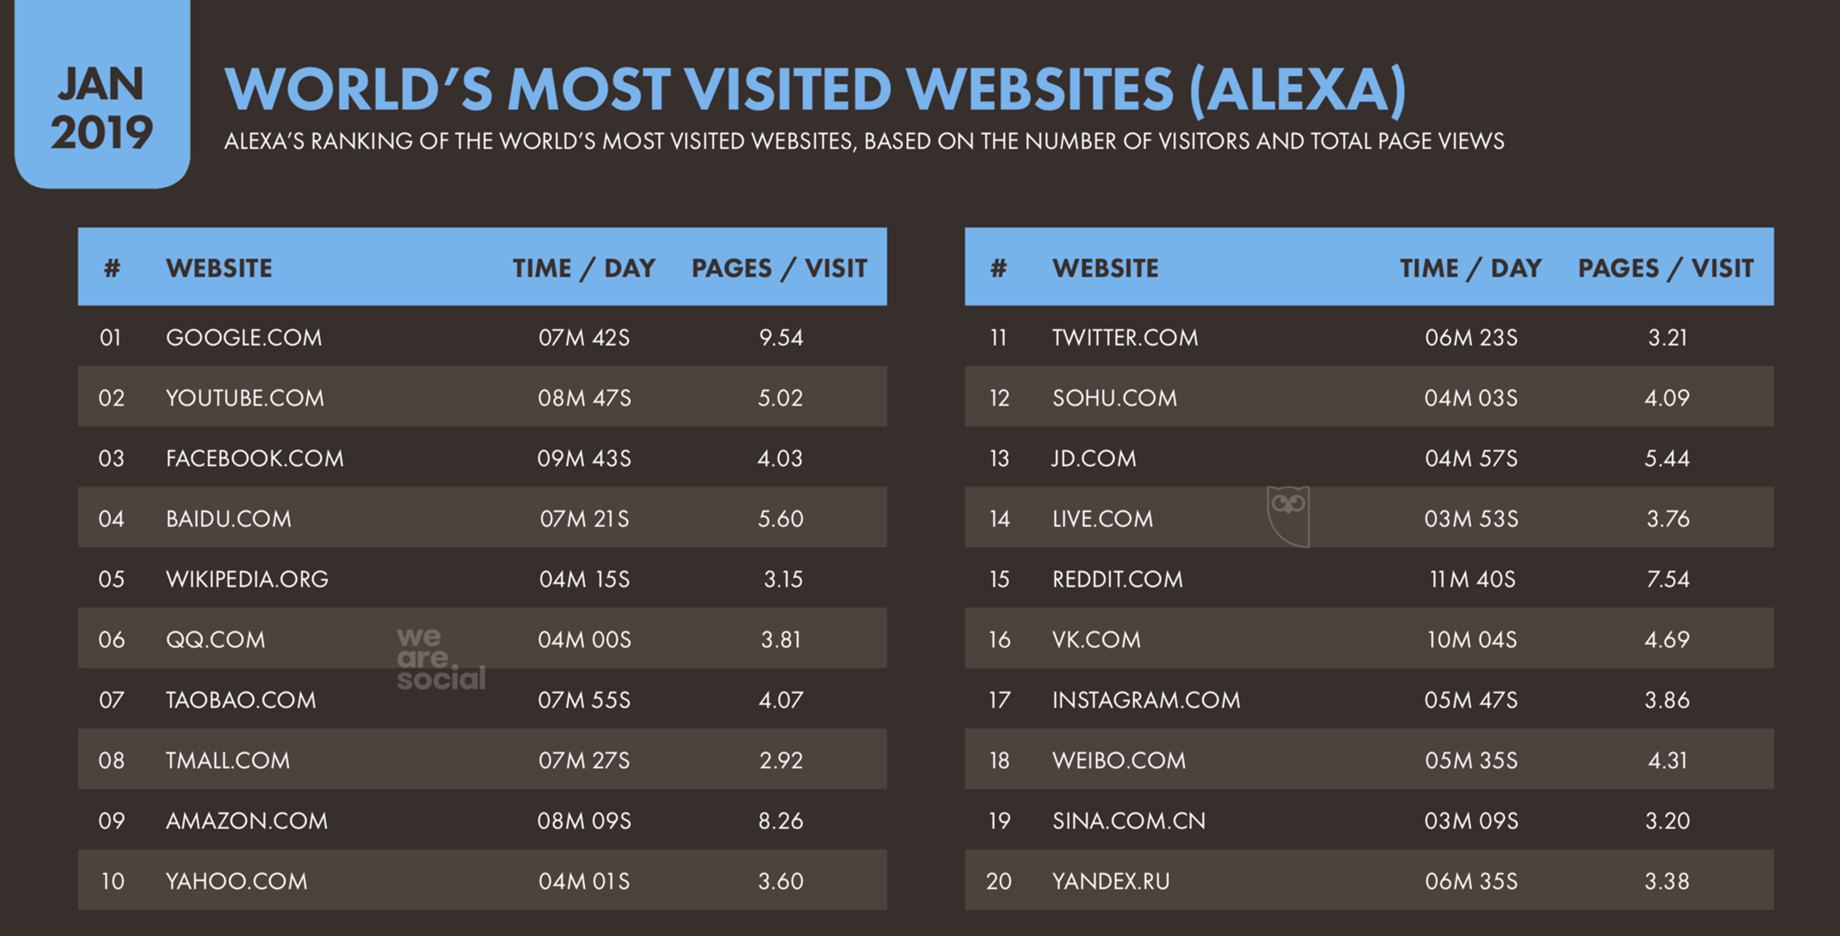 Worlds Most Visited Websites Alexa Ranking – Based on the Number of Visitors and Total Page Views